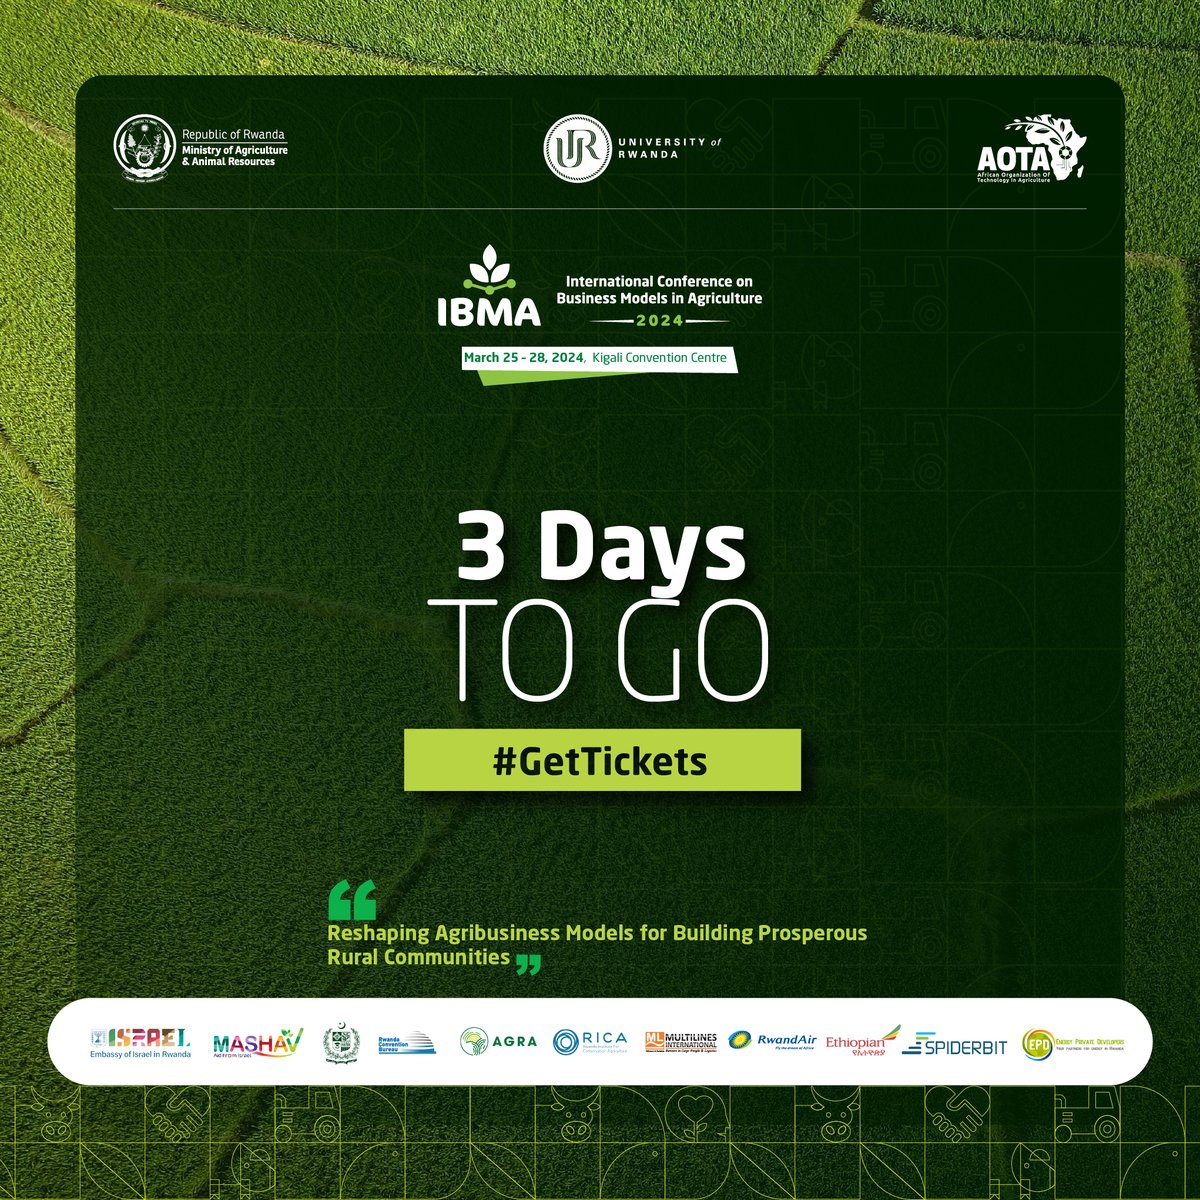 3 days to Impact! Brace for #Positive #Impact on:

#Agriculture #Agribusiness #Agricultural #Valuechains 
#AgricultureasaBusiness #AgriTech  #ruraldevelopment 

IBMA is a rising tide that's lifting all properly align boats. Get aligned!